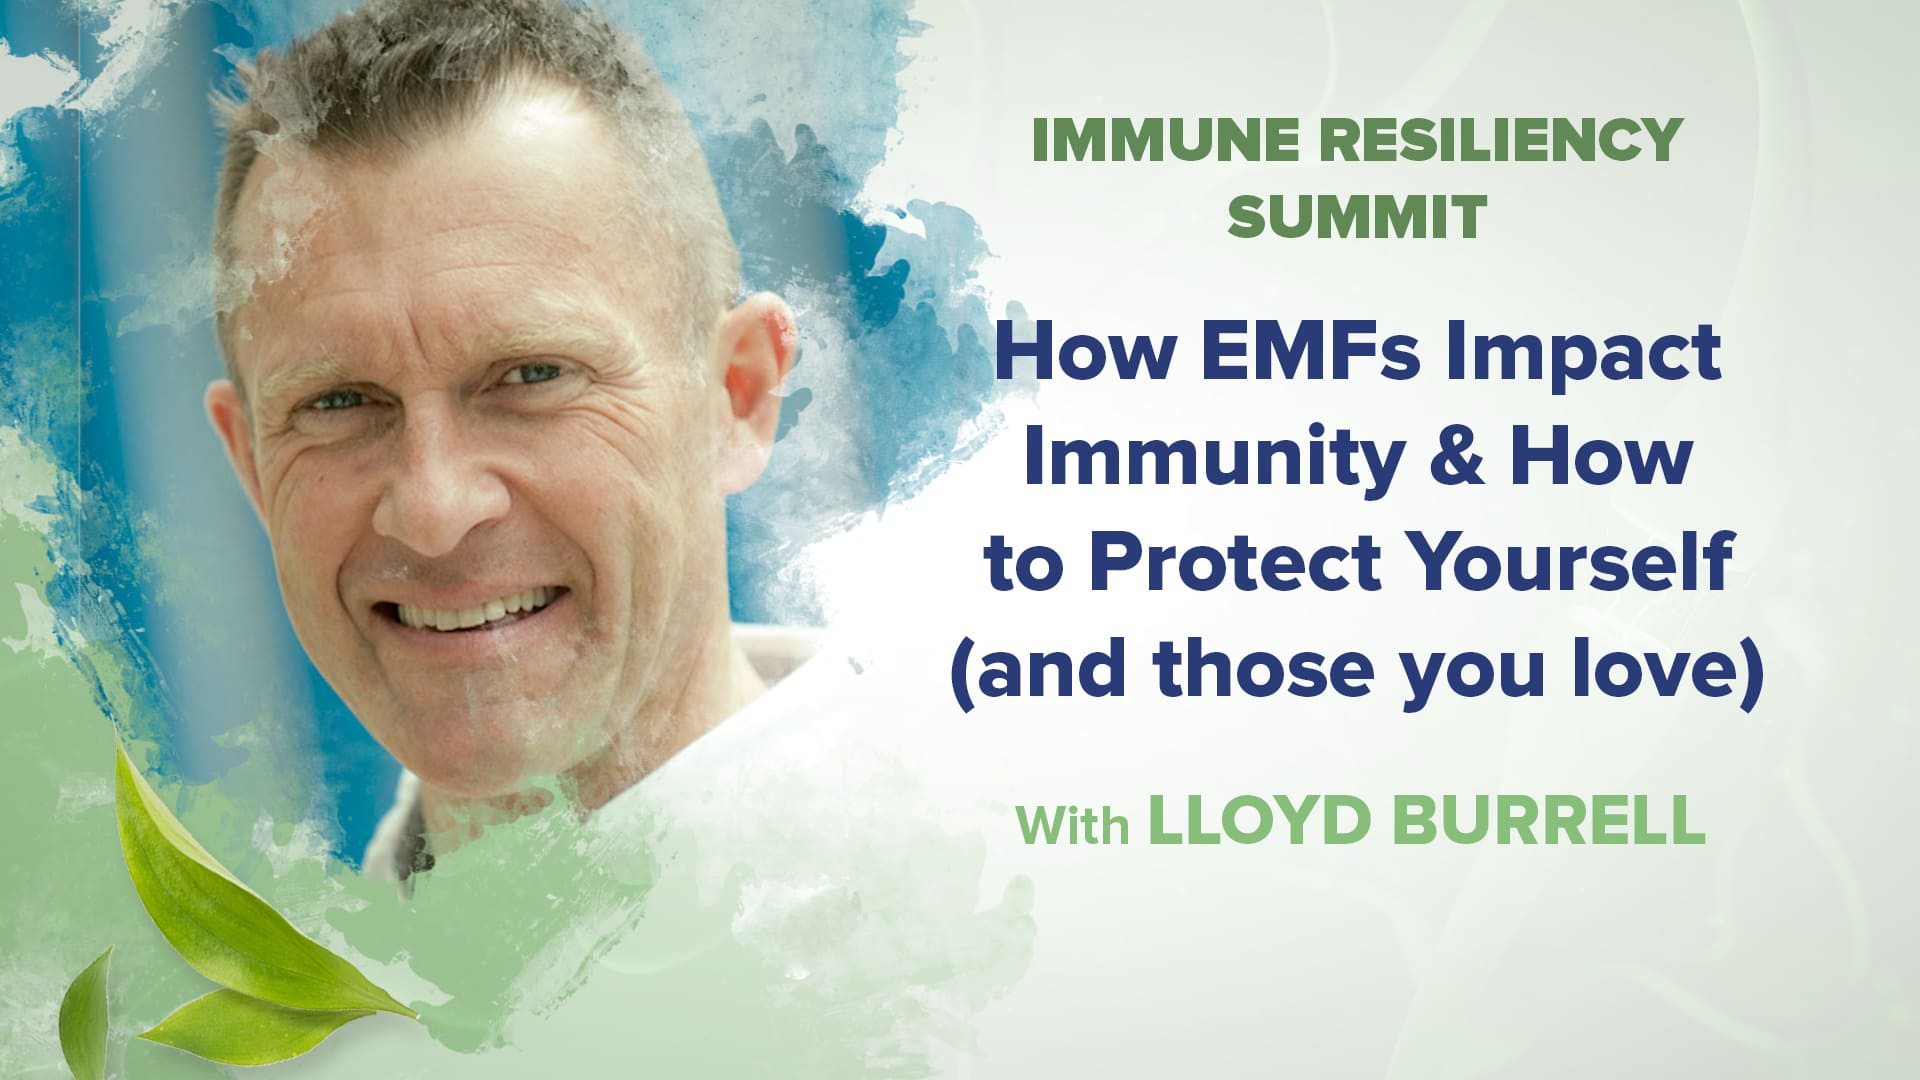 How EMFs Impact Immunity & How to Protect Yourself (and those you love)